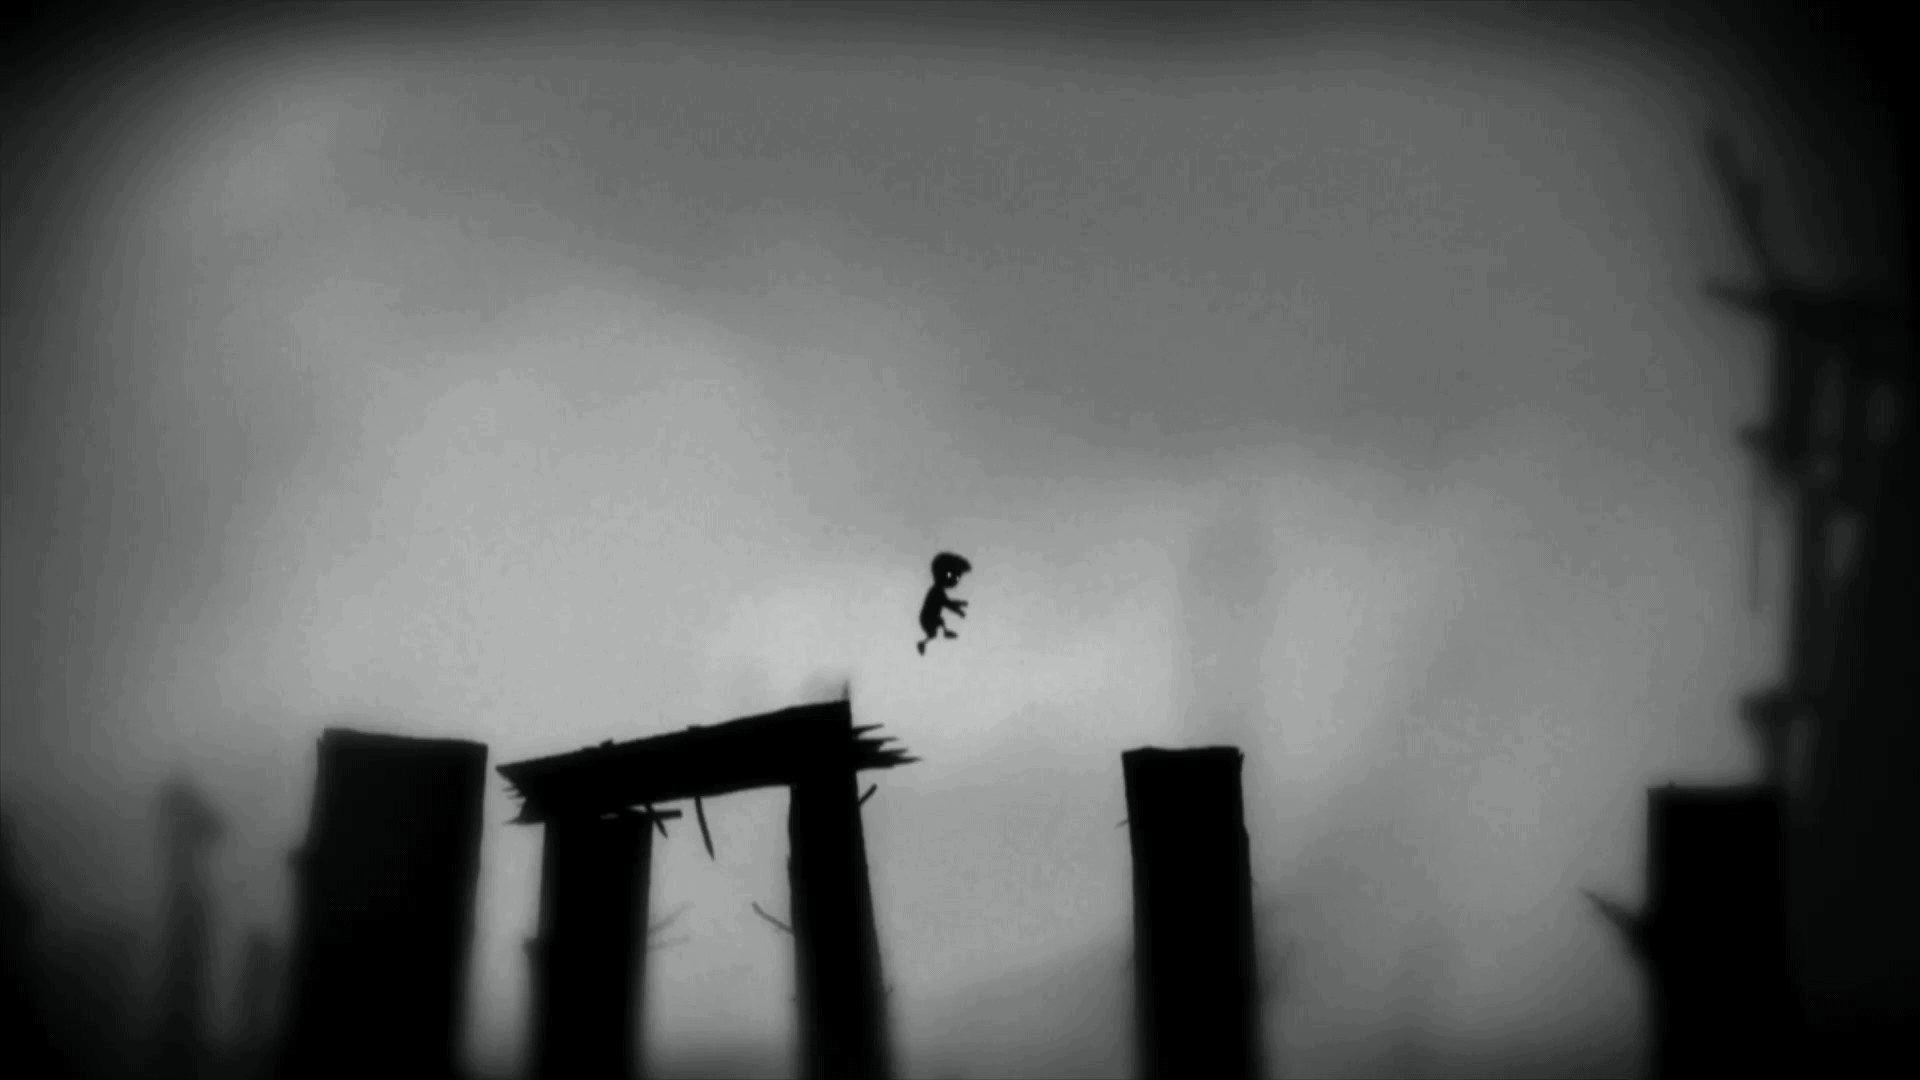 An image of a person on top of wooden poles in black and white.